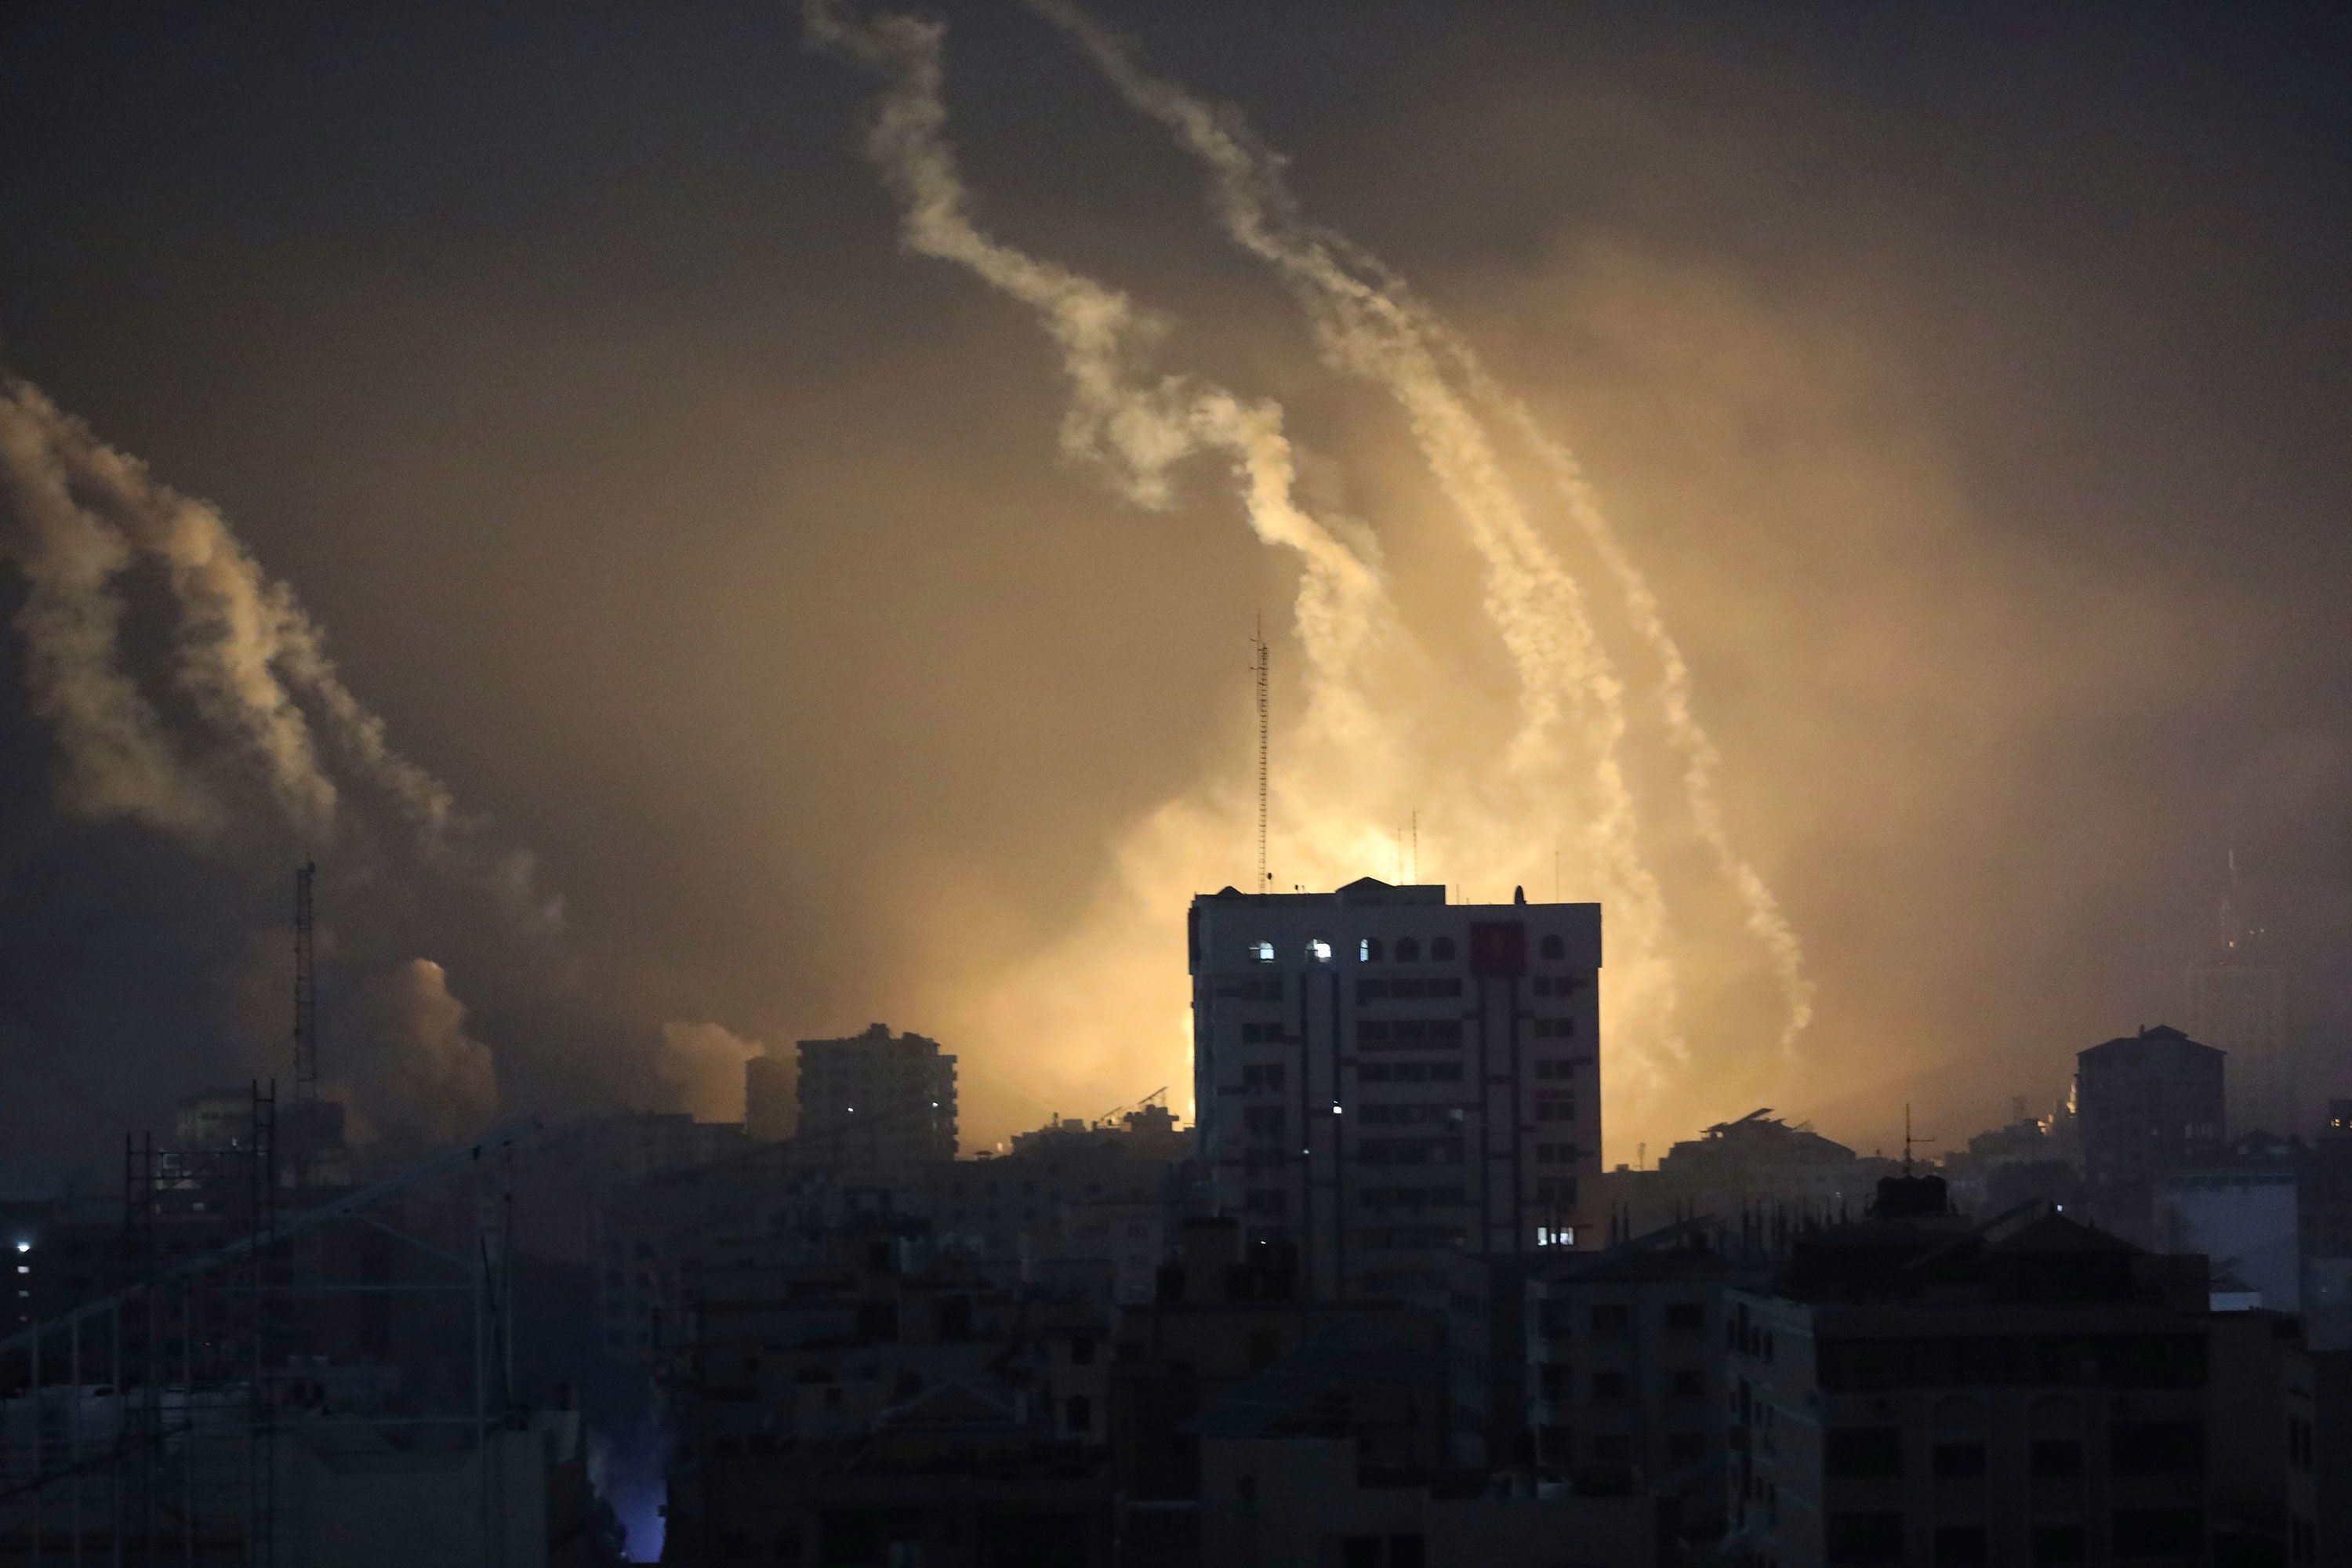 Smoke and explosions are seen on the horizon in northern Gaza, amid Israel's bombardment of the enclave, on Saturday, October 28.